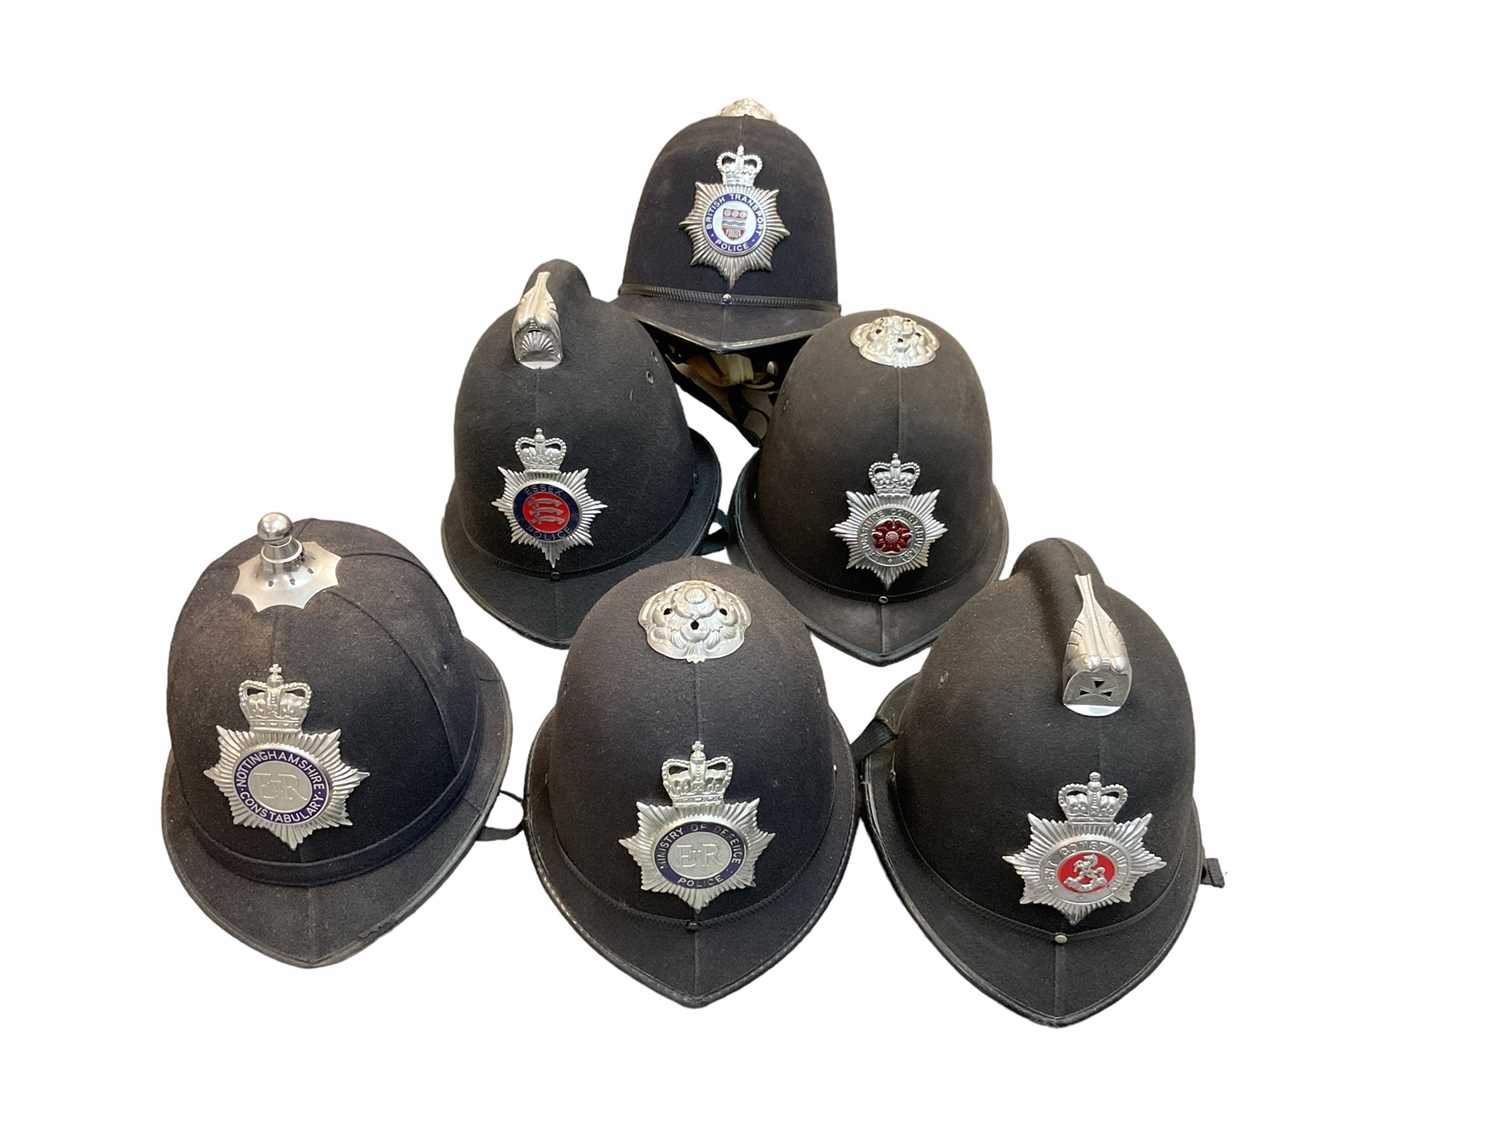 Lot 830 - Group of six Elizabeth II Police helmets to include British Transport Police, Nottinghamshire Constabulary, Ministry of Defence Police, Kent Constabulary, Lancashire Constabulary and Essex Police (...